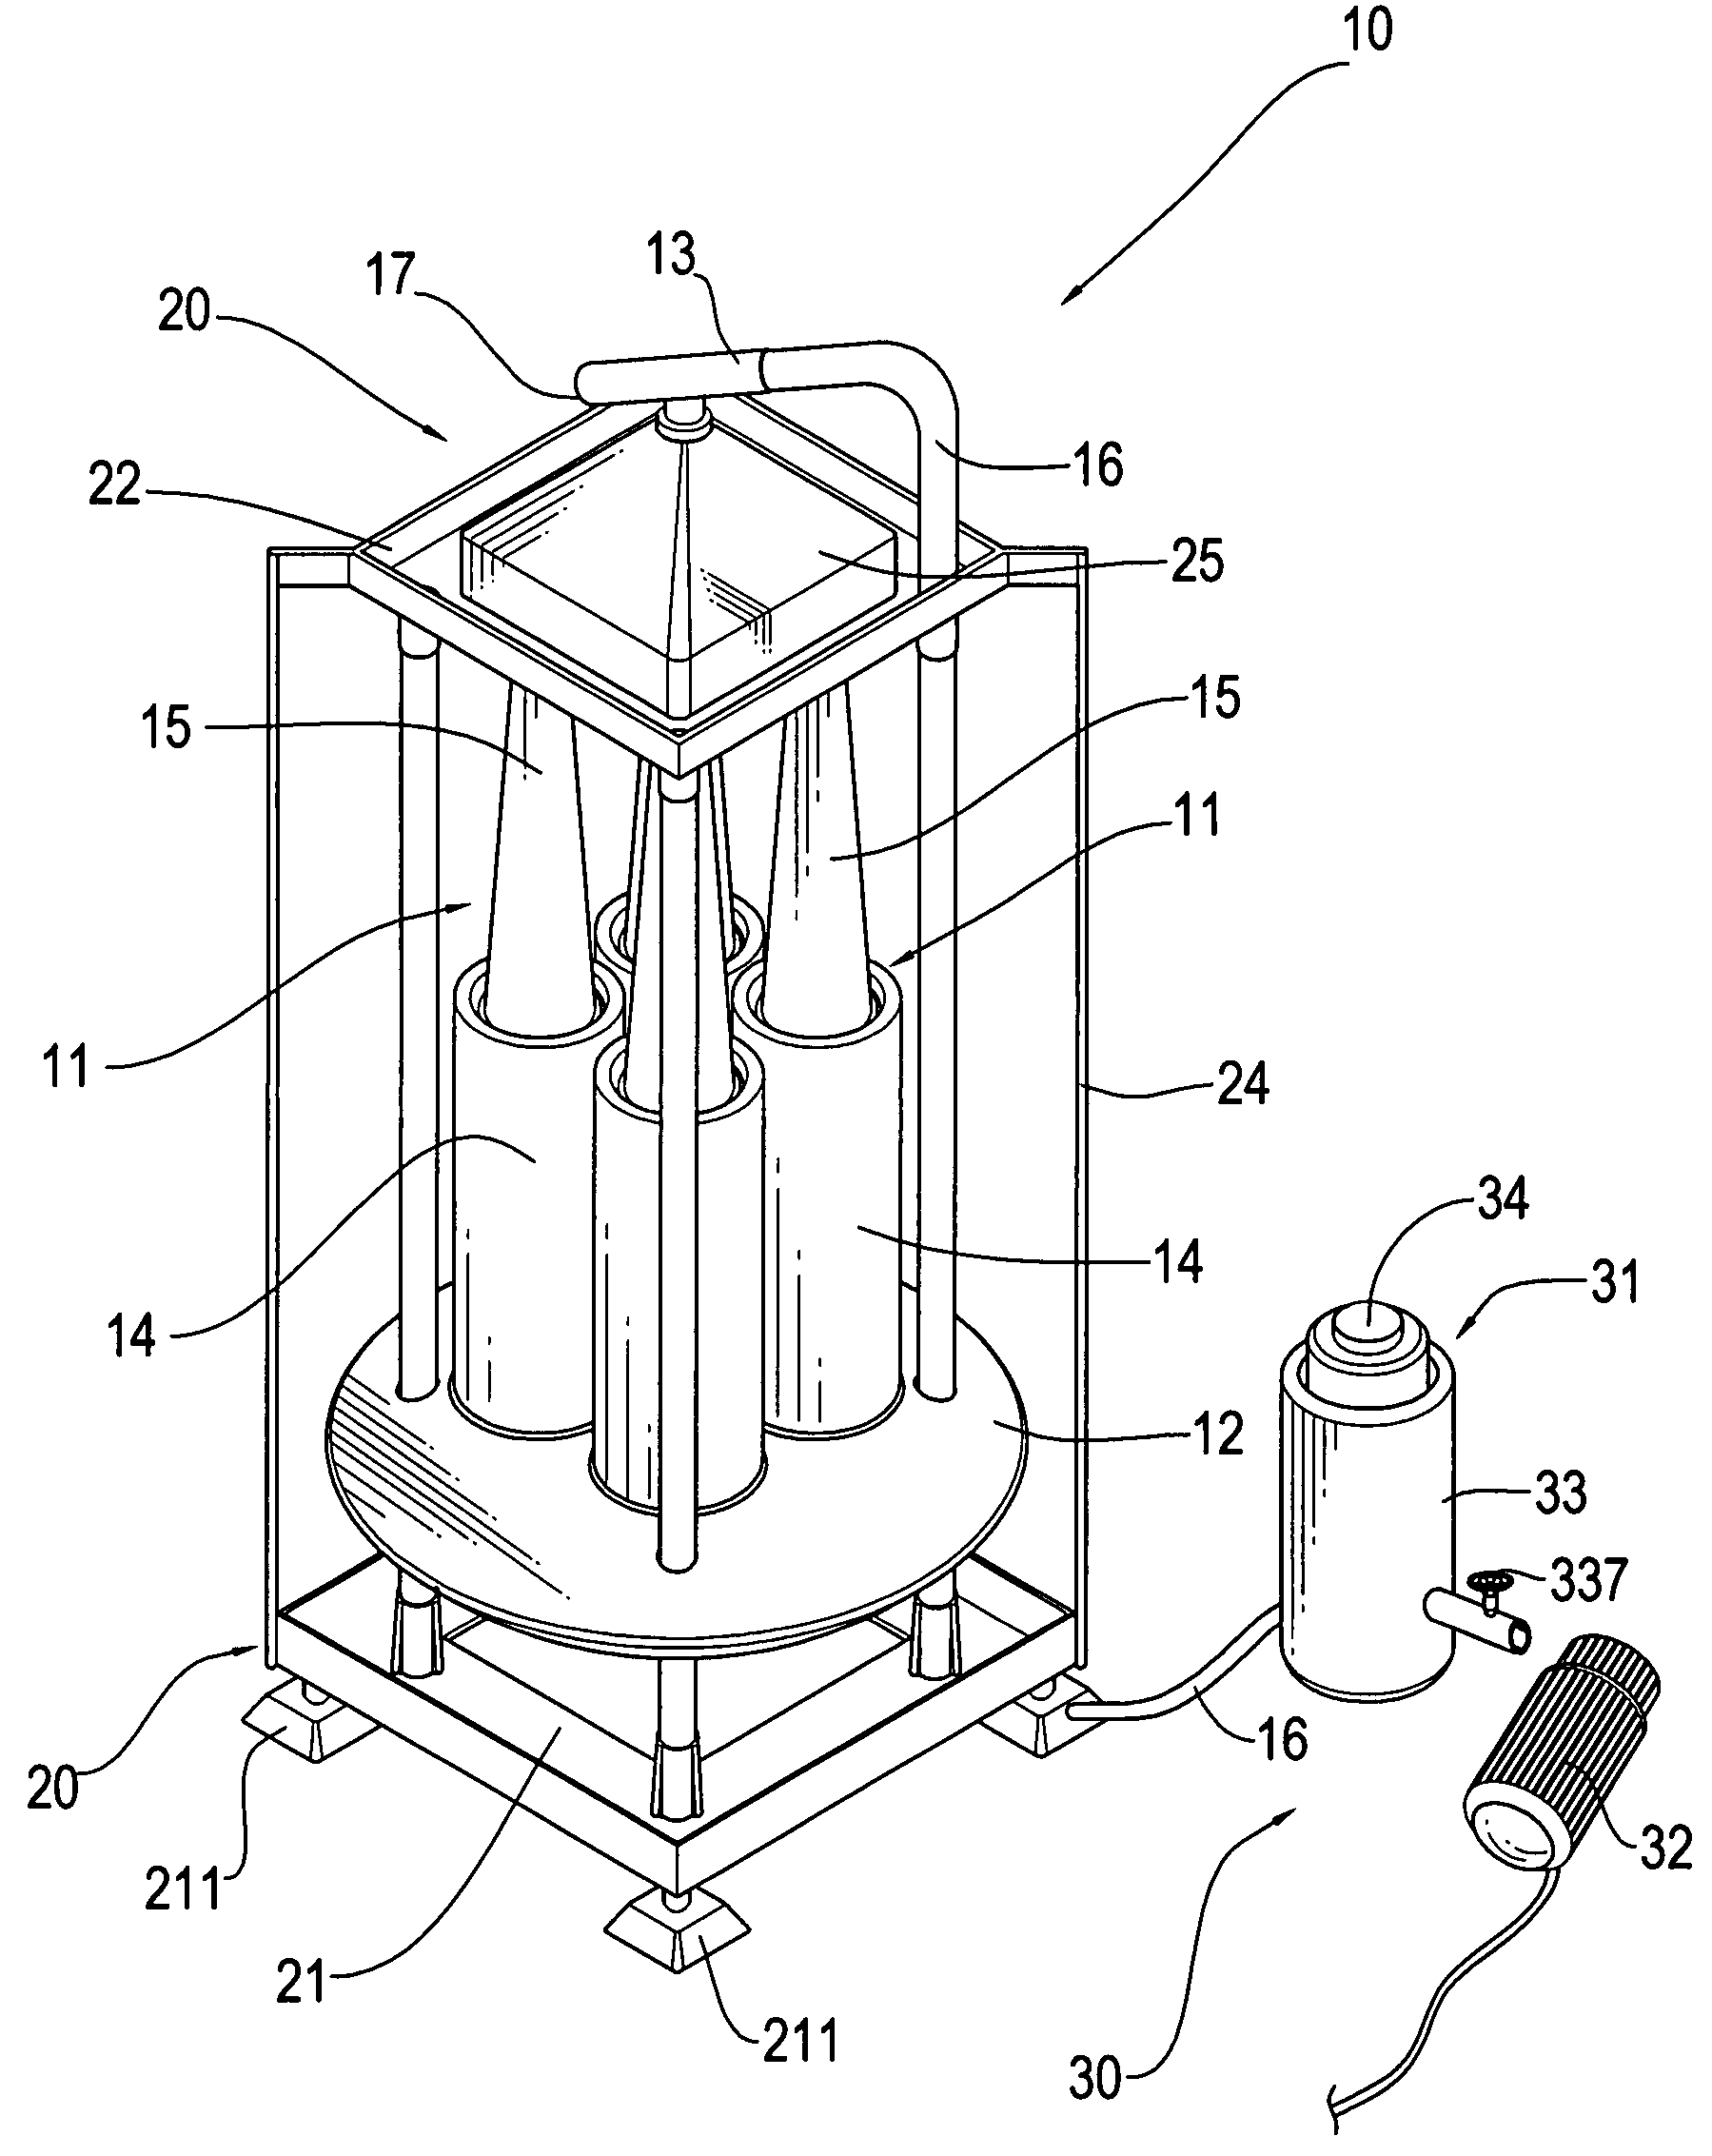 Air-blower tidal power generation device